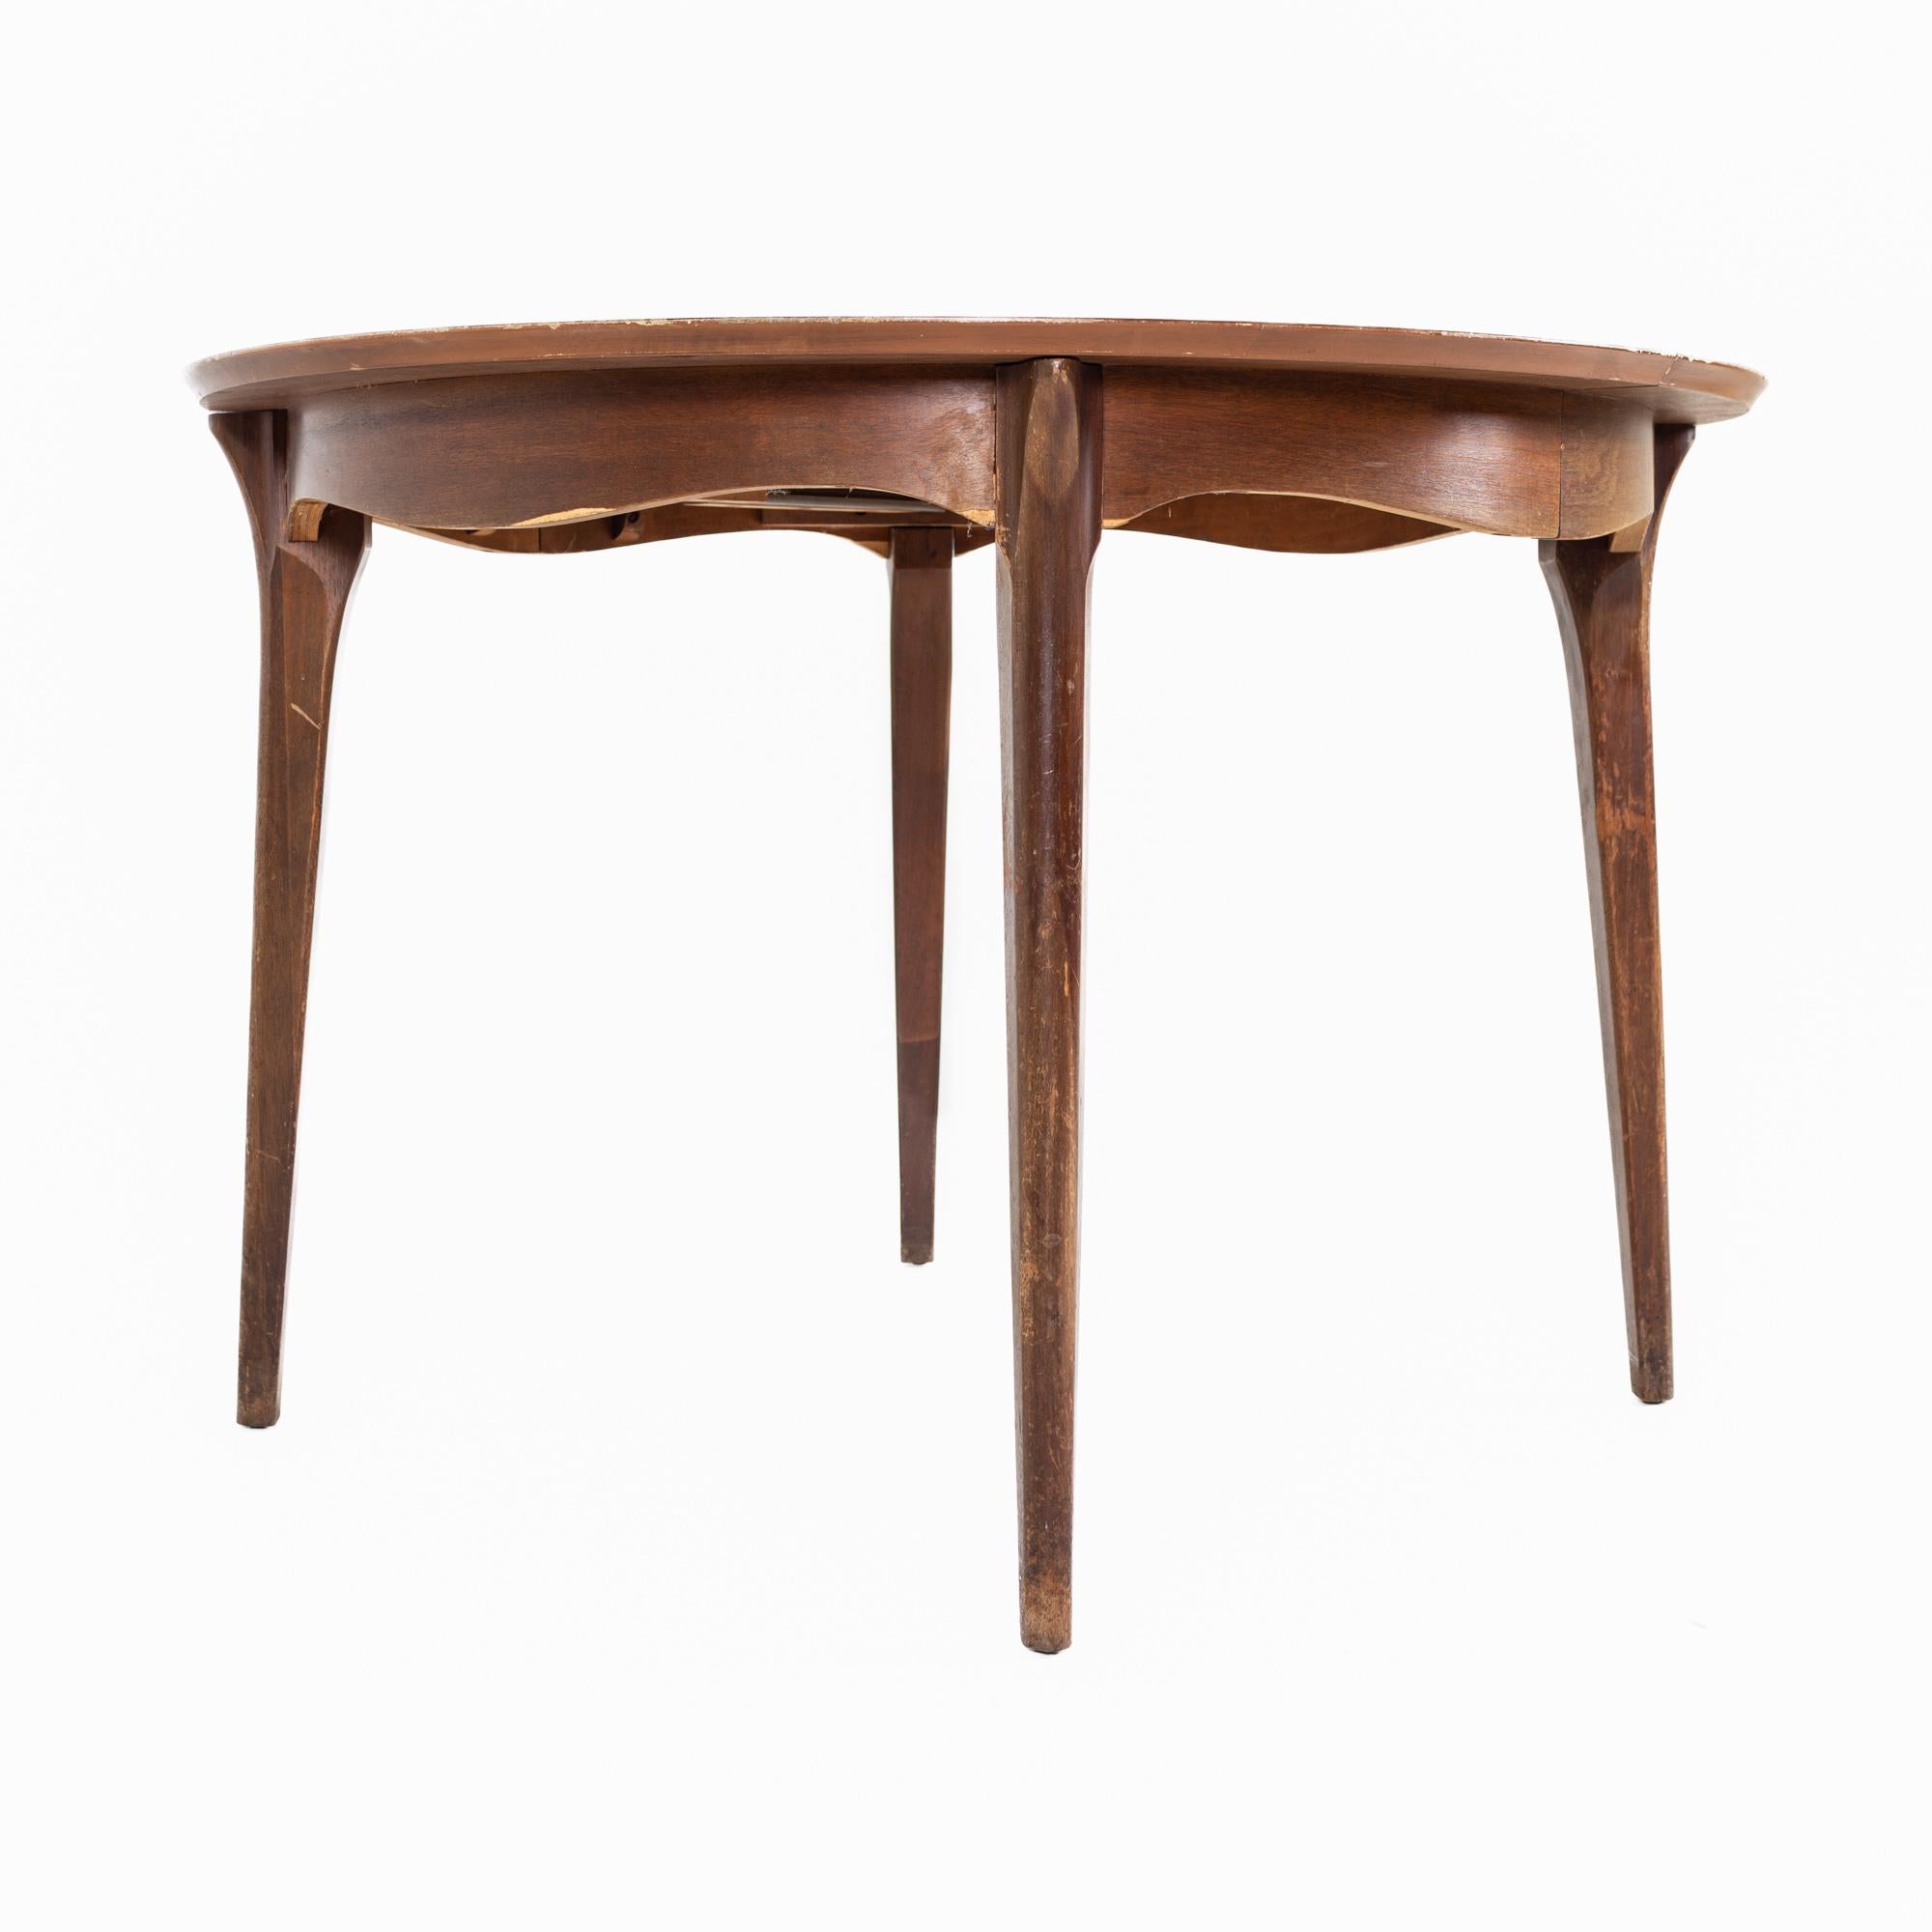 Late 20th Century Drexel Dateline Mid Century Walnut Dining Table For Sale